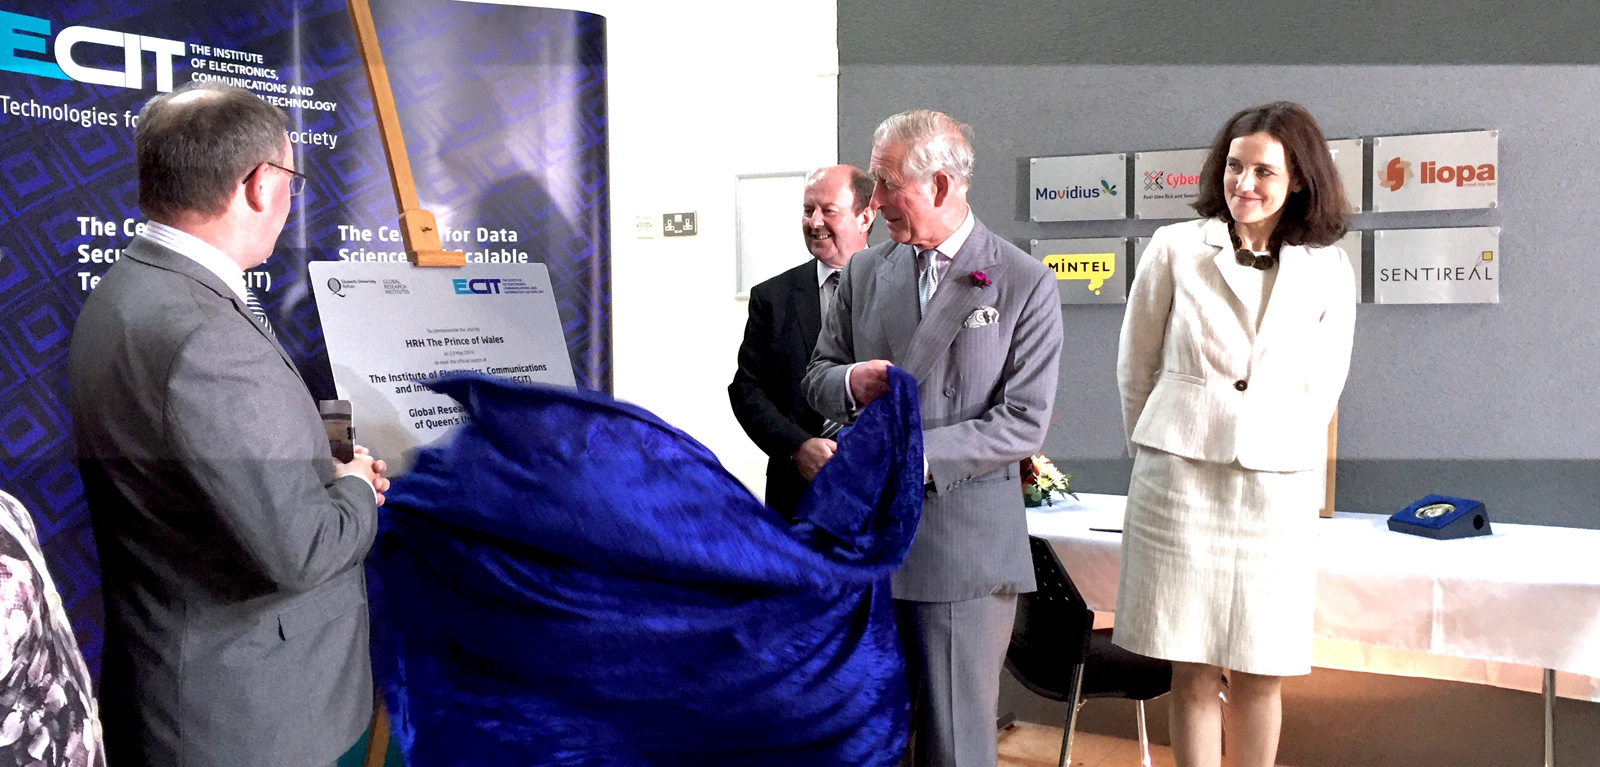 HRH The Prince of Wales ECIT GRI Launch